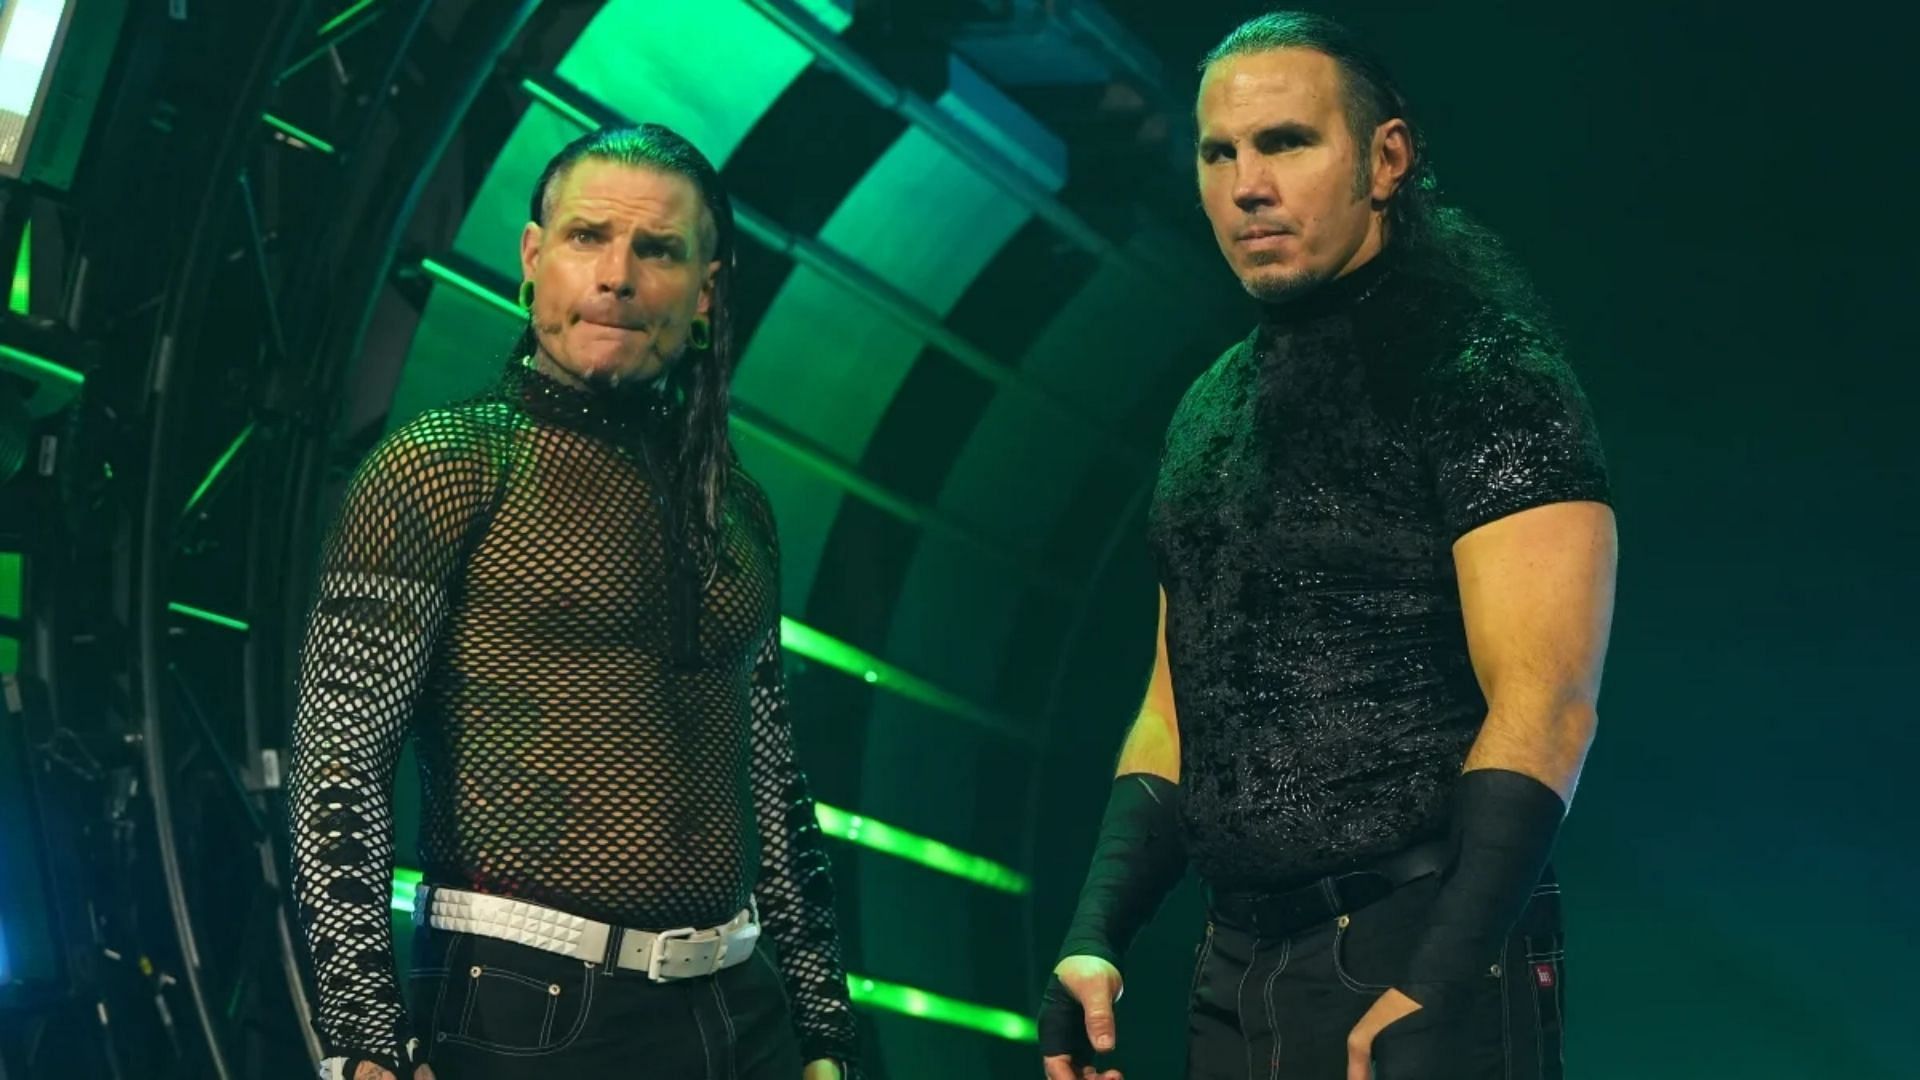 The Hardy Brothers are multi-time tag team champions.